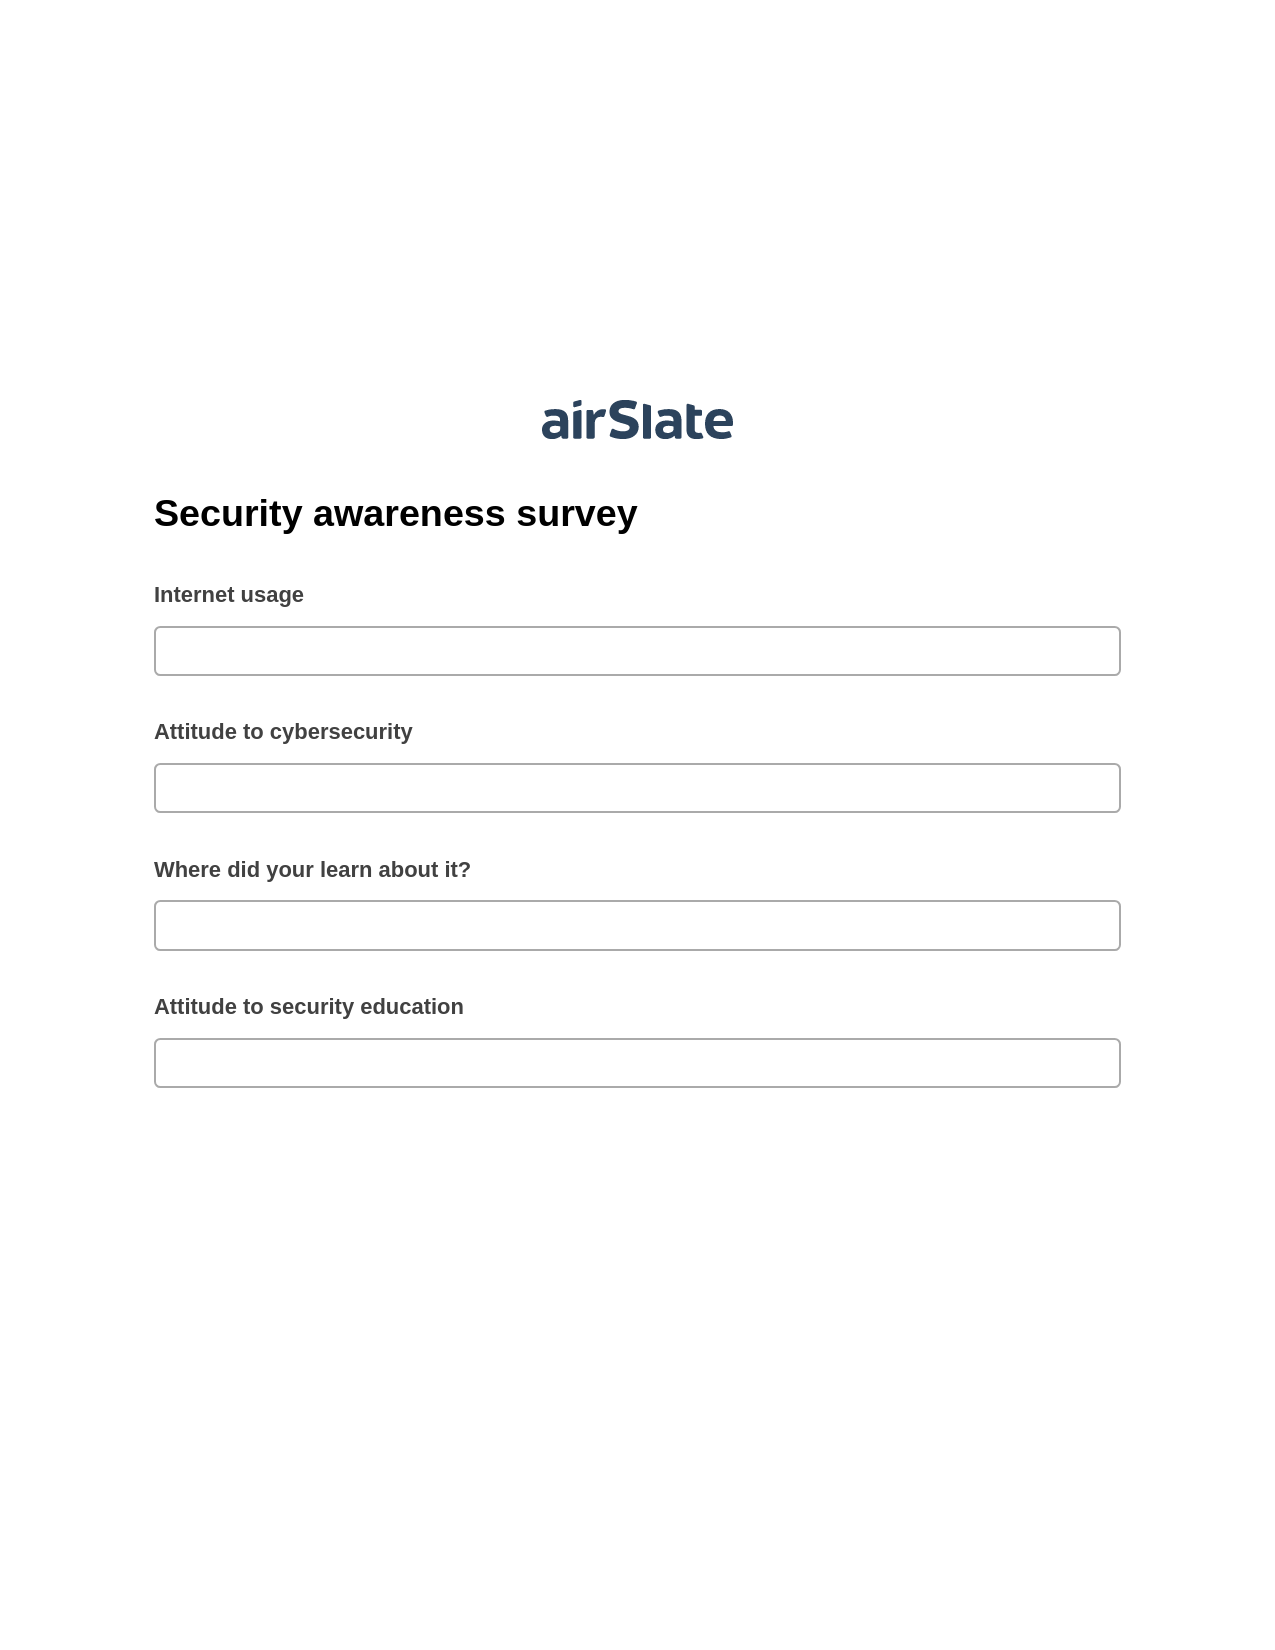 Security awareness survey Pre-fill from CSV File Bot, 1Create Slate every Google Sheet Update Bot, Slack Two-Way Binding Bot